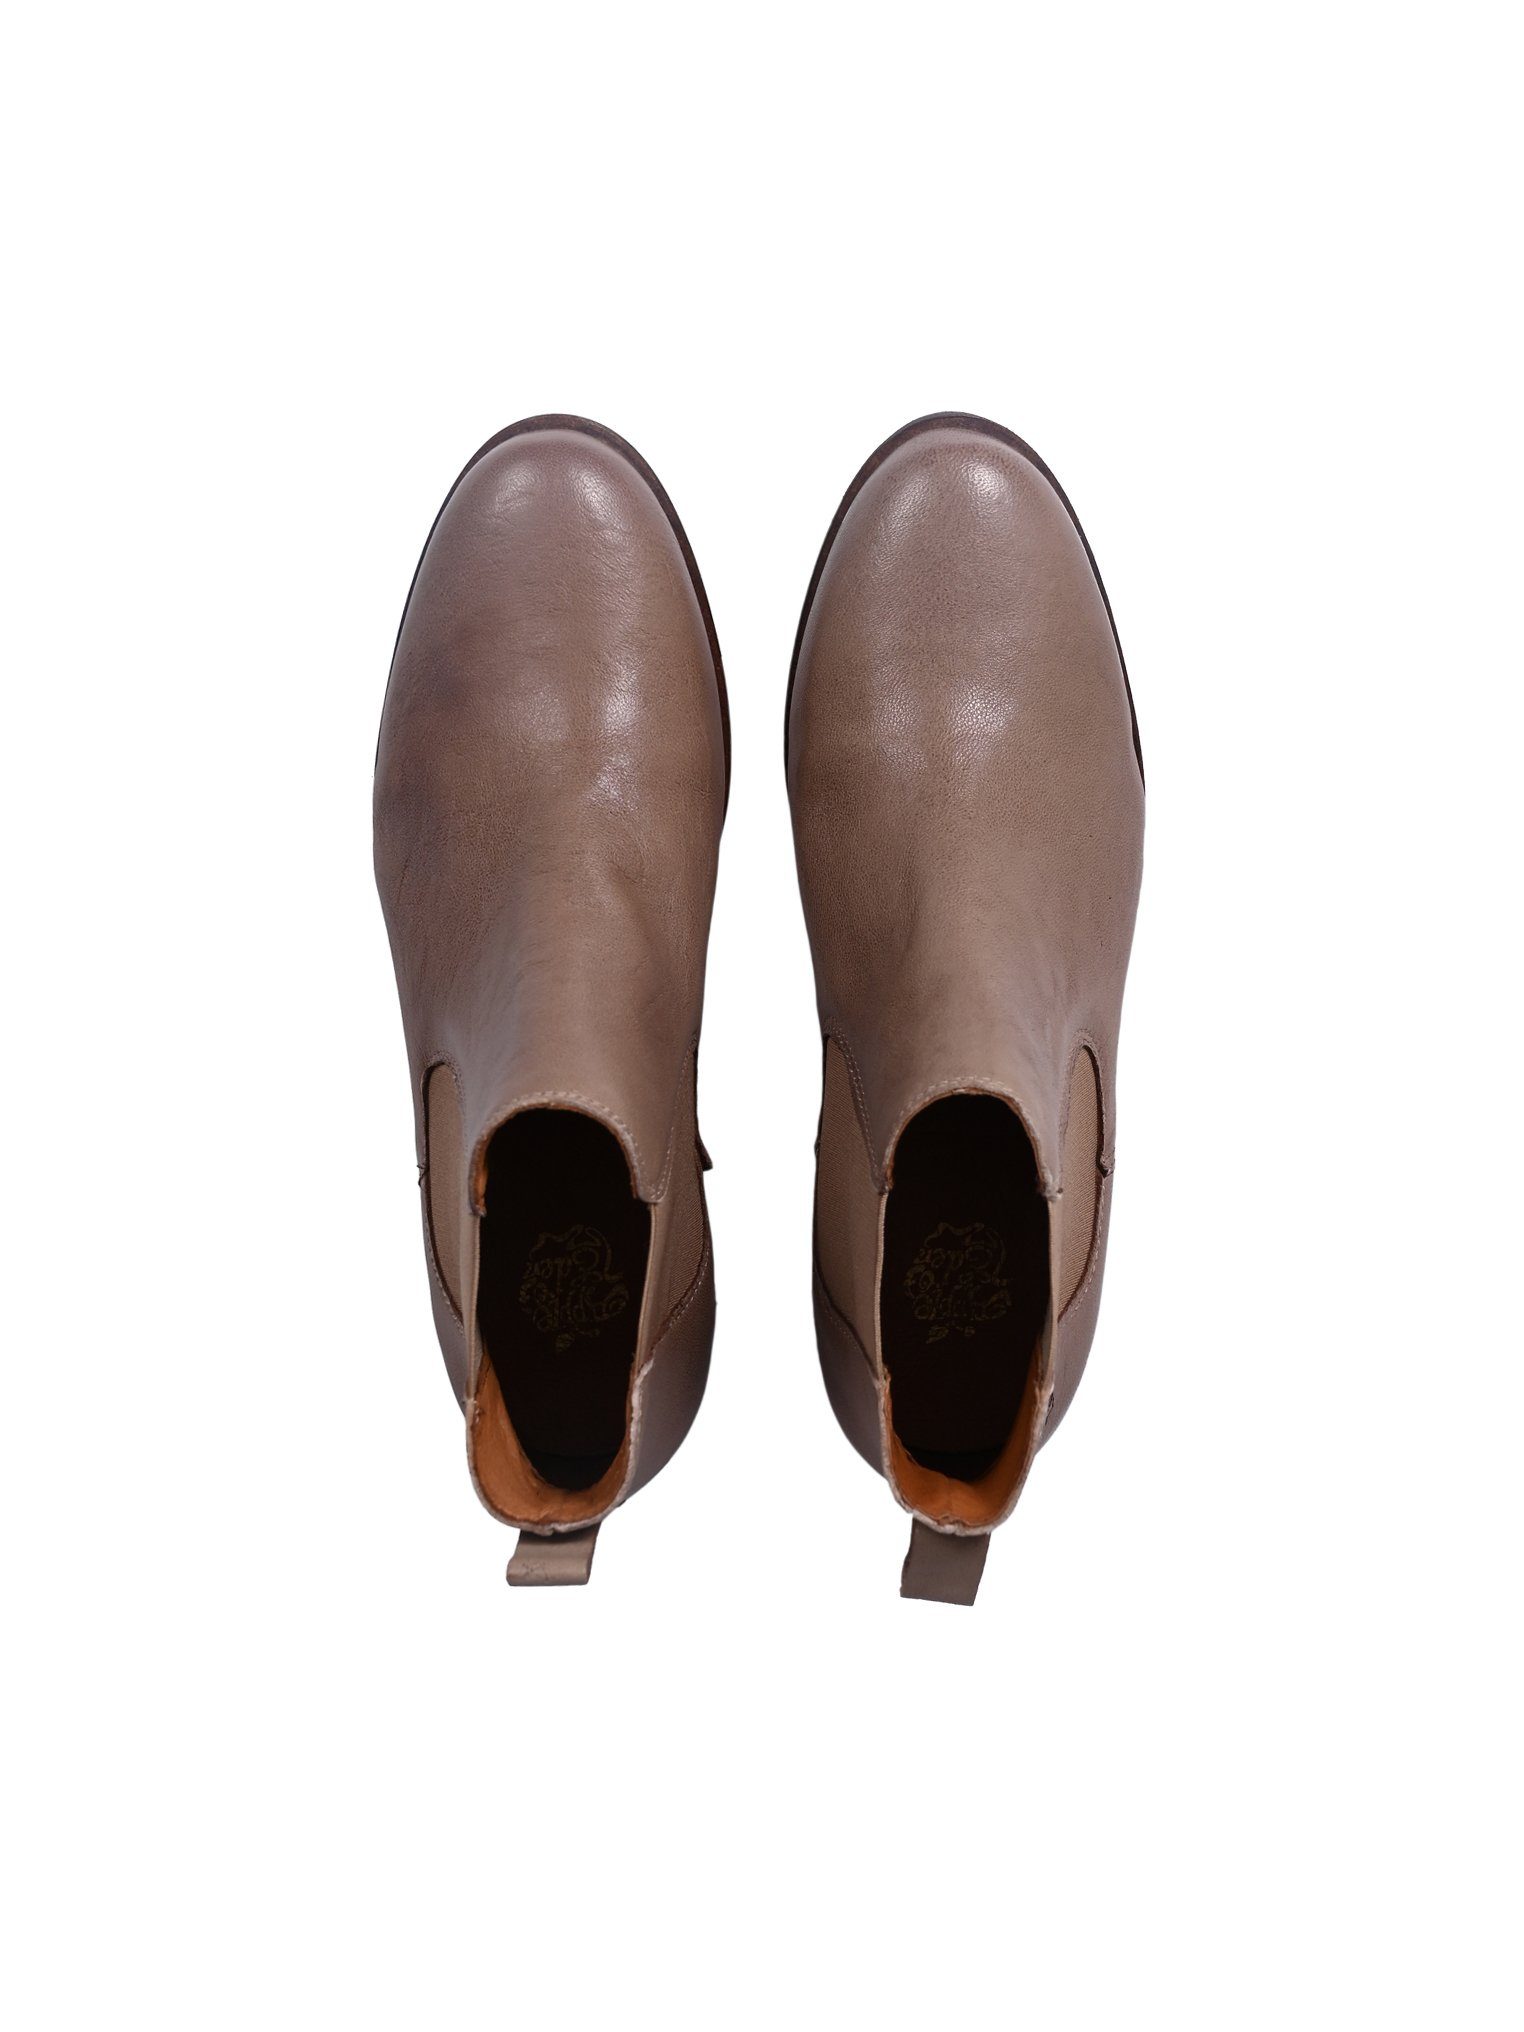 Chelseaboots Apple of Eden Taupe MANON